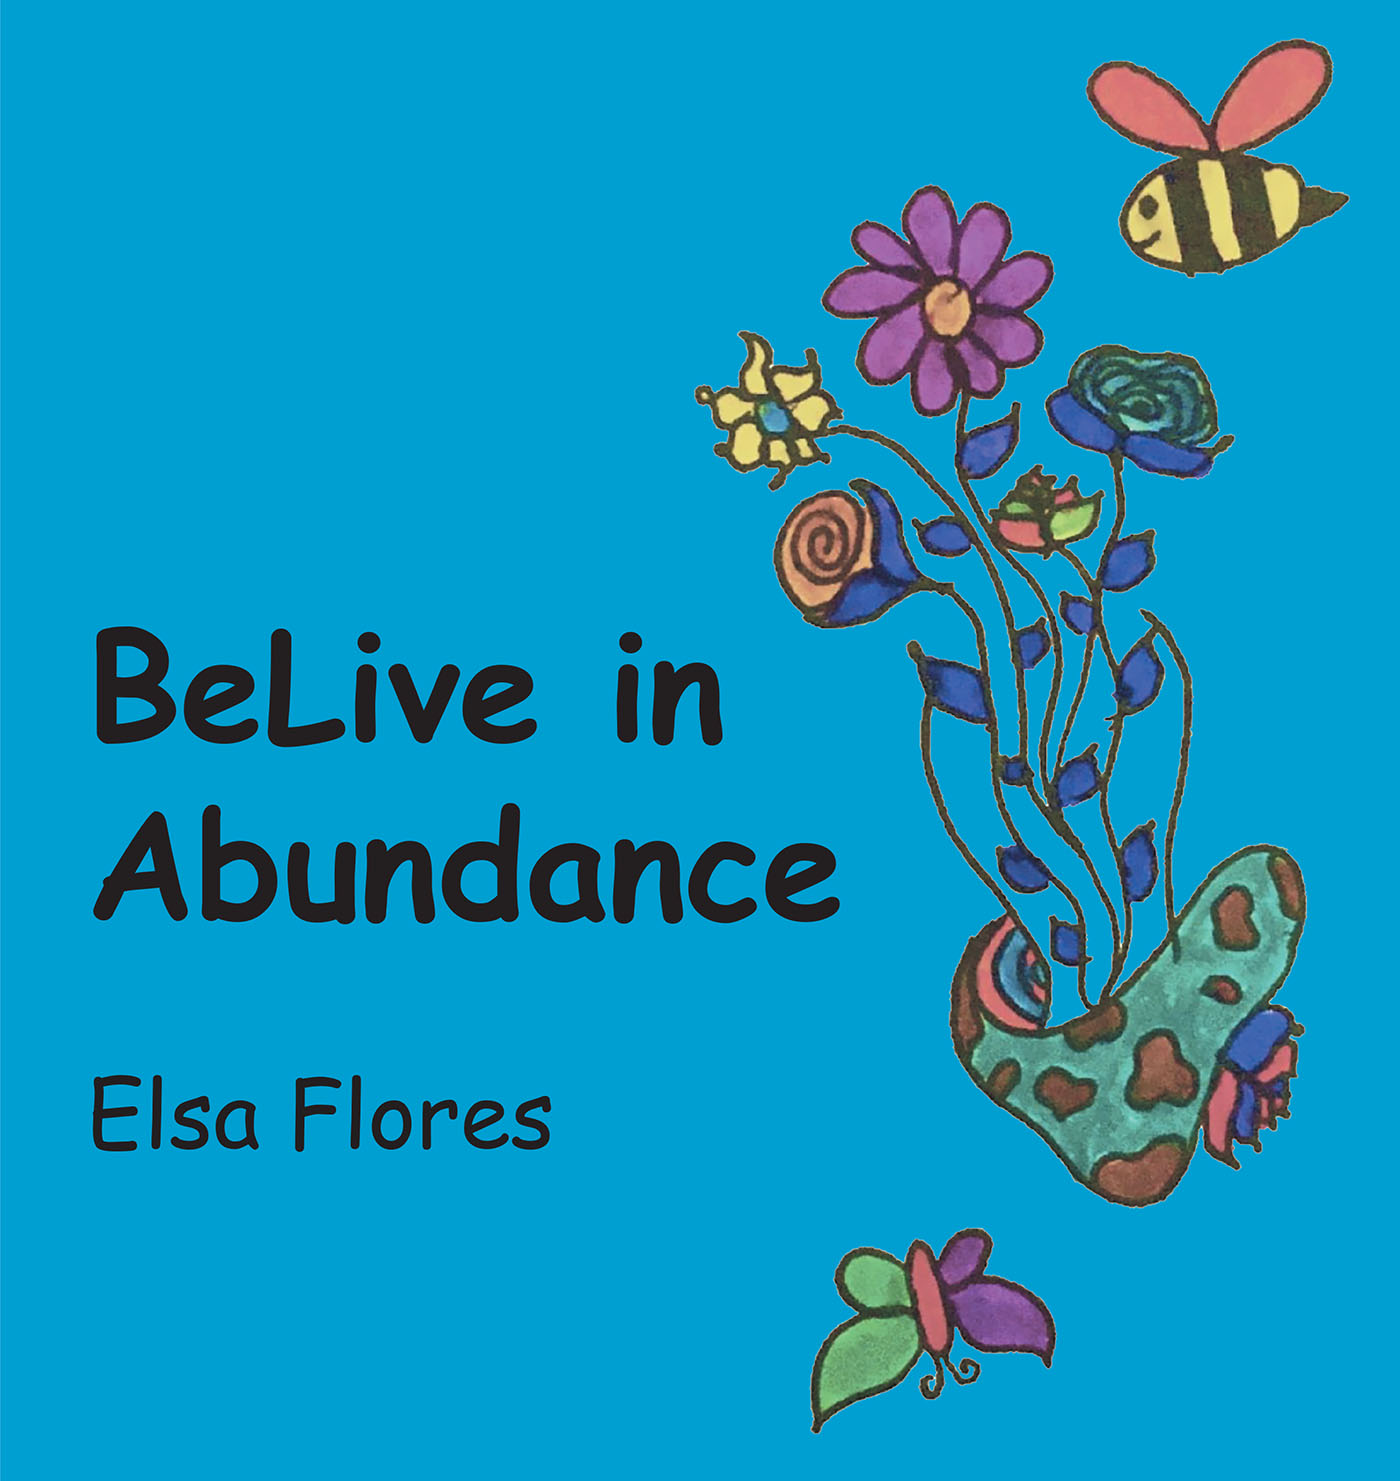 Author Elsa Flores’s New Book, “BeLive in Abundance,” is an Interactive Workbook Designed to Assist Those Committed to Changing Their Lives for the Better